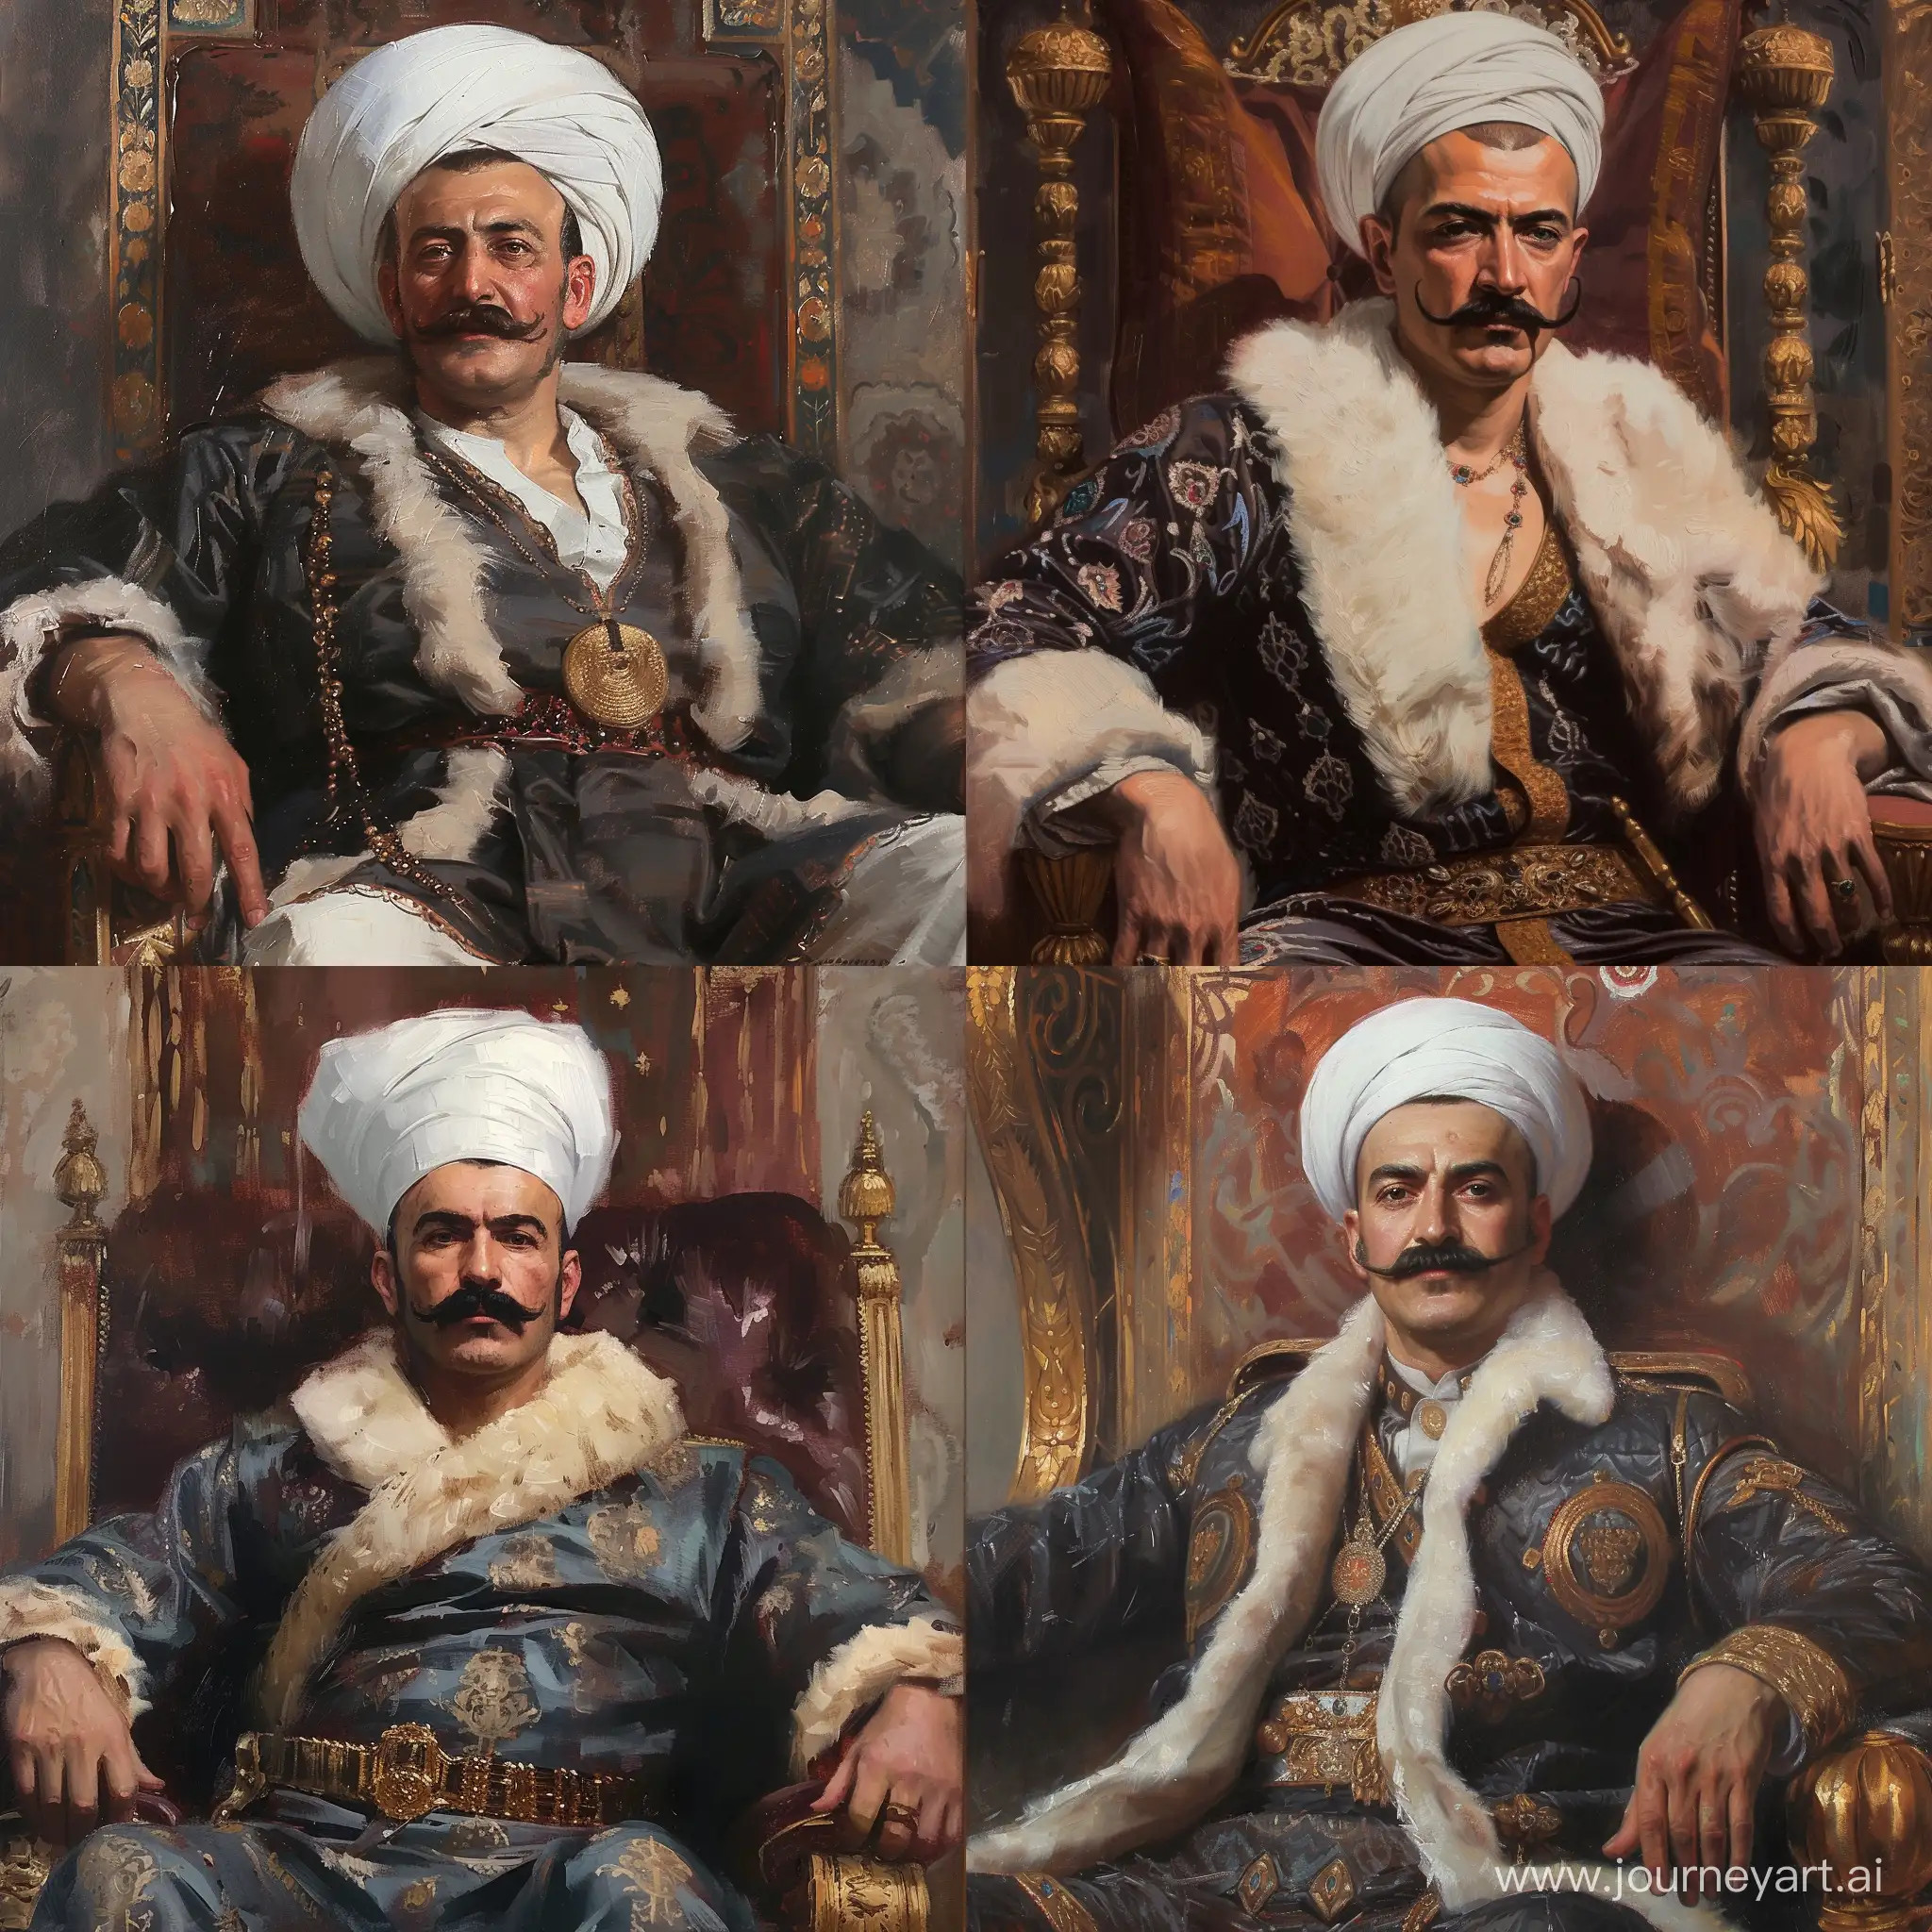 Luxurious-Ottoman-Sultan-Selim-I-on-Throne-in-Palace